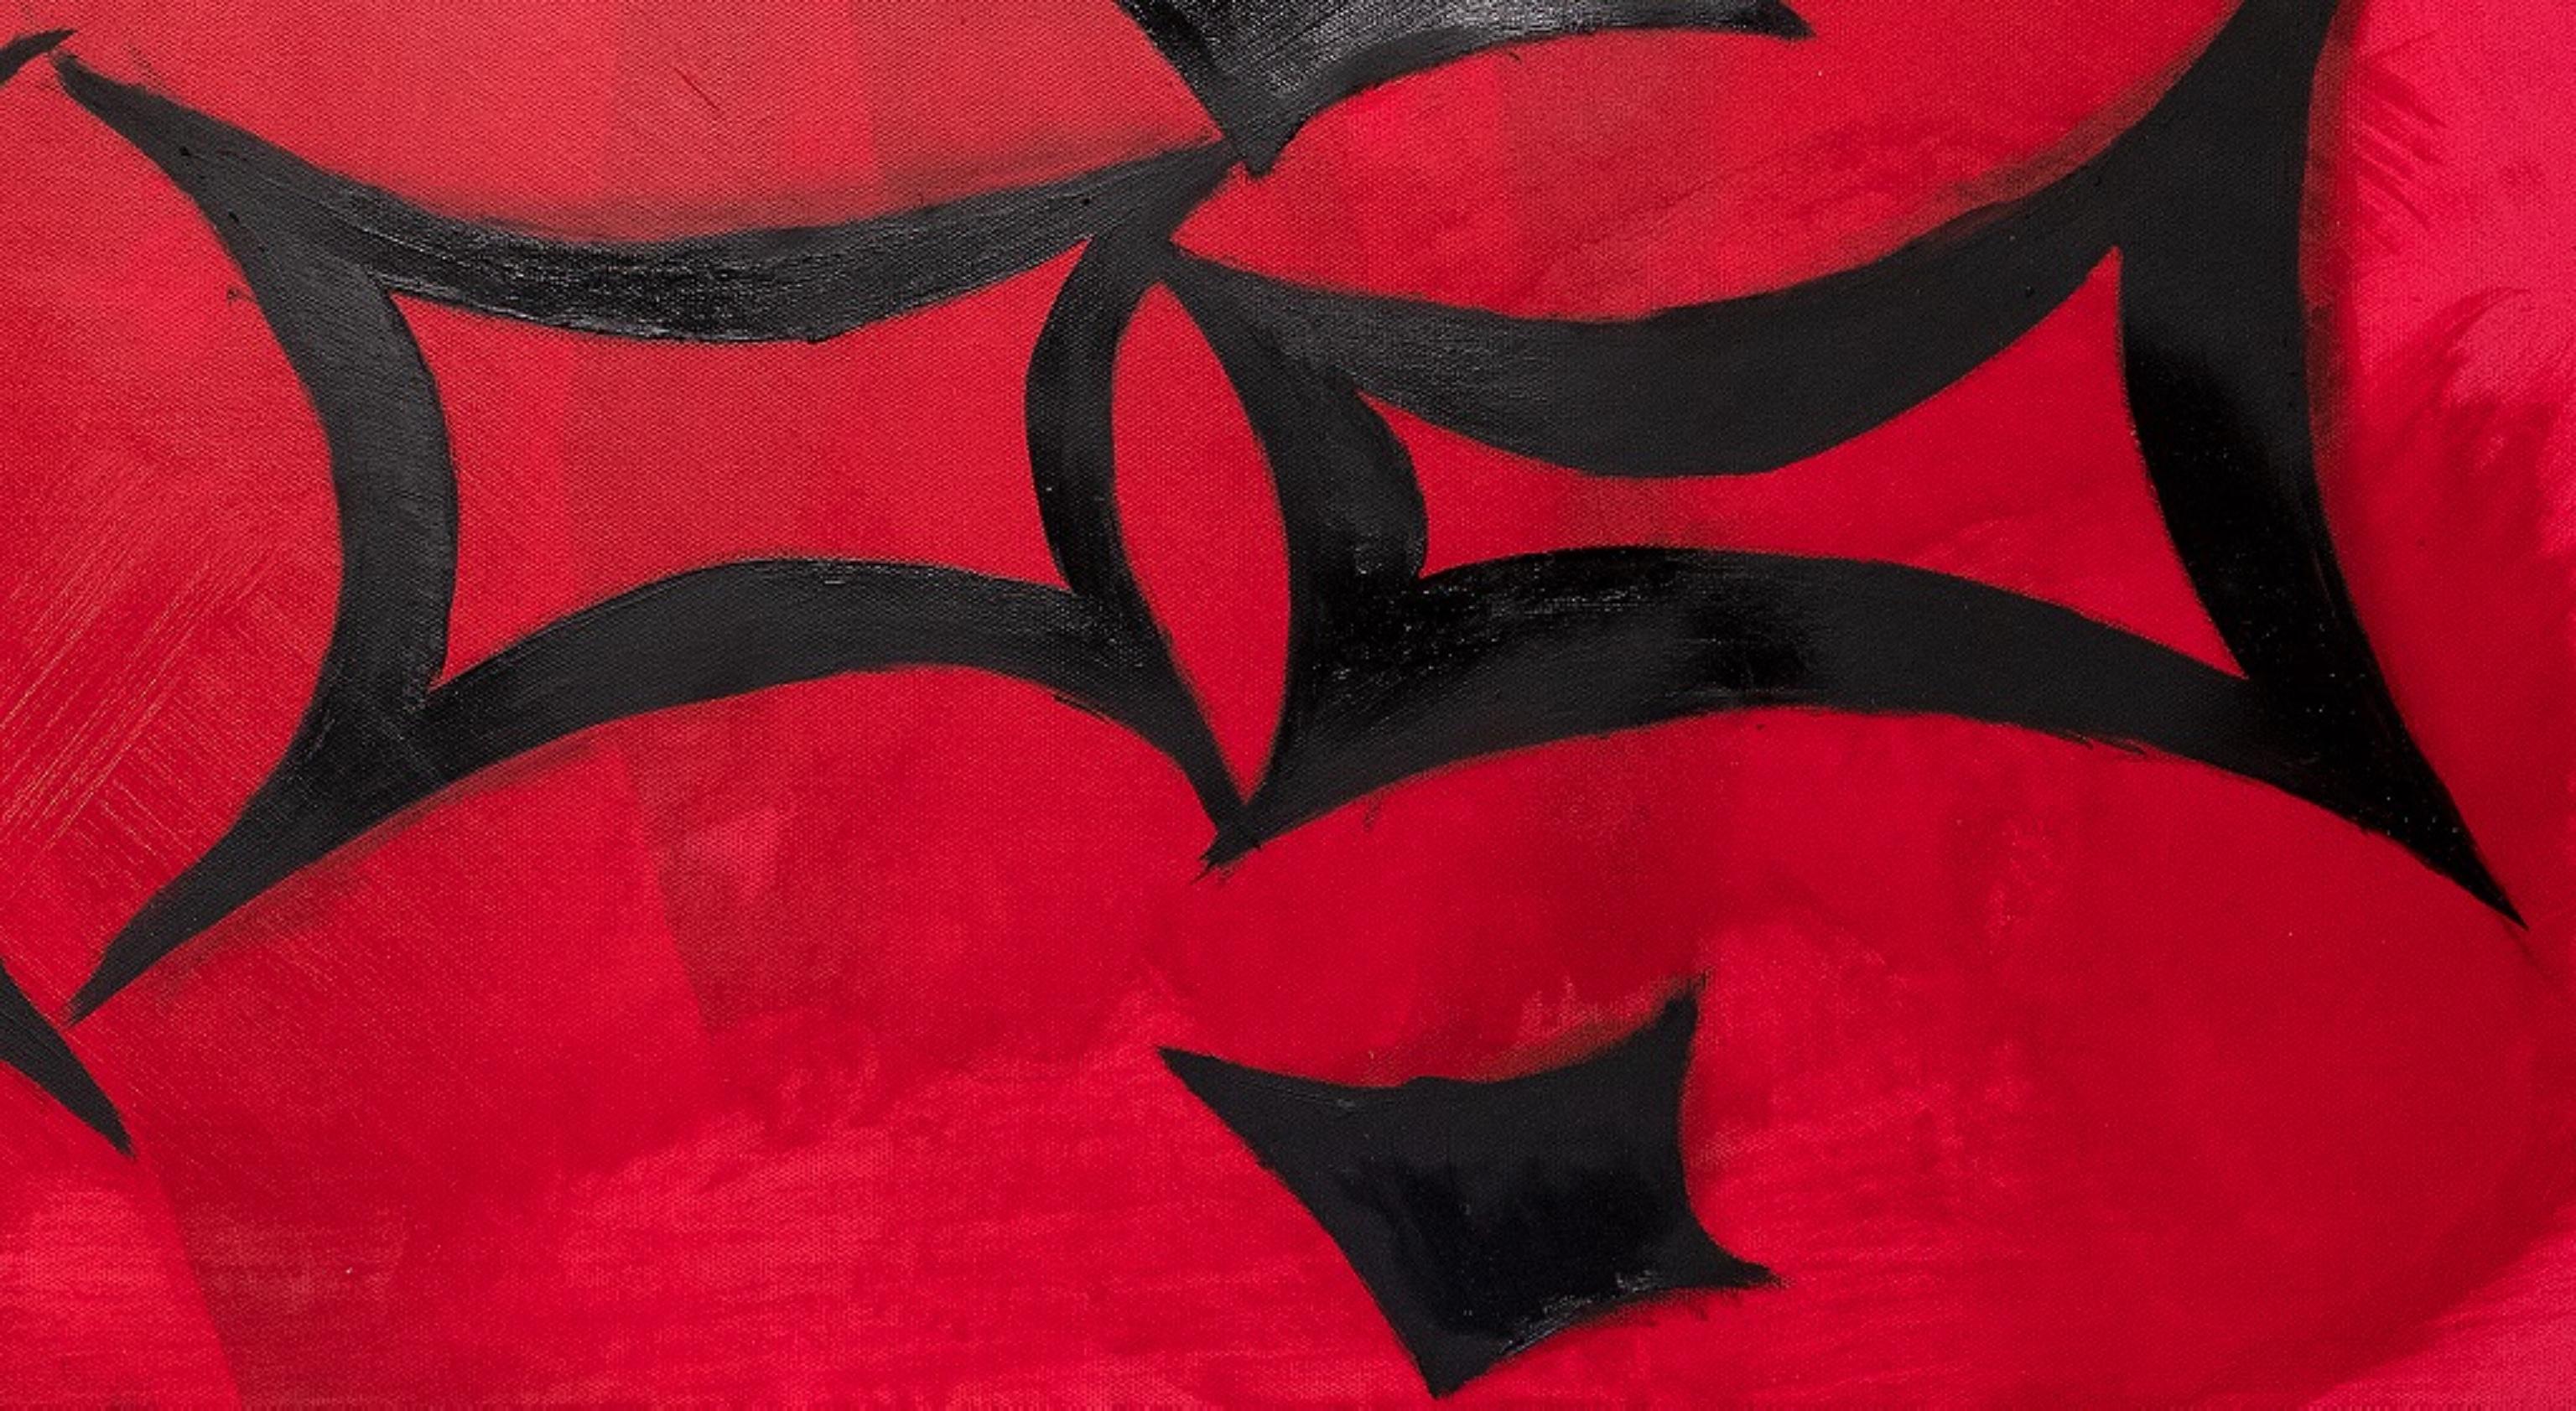 Ideograms II - Oil Paint by Giorgio Lo Fermo - 2021 For Sale 1